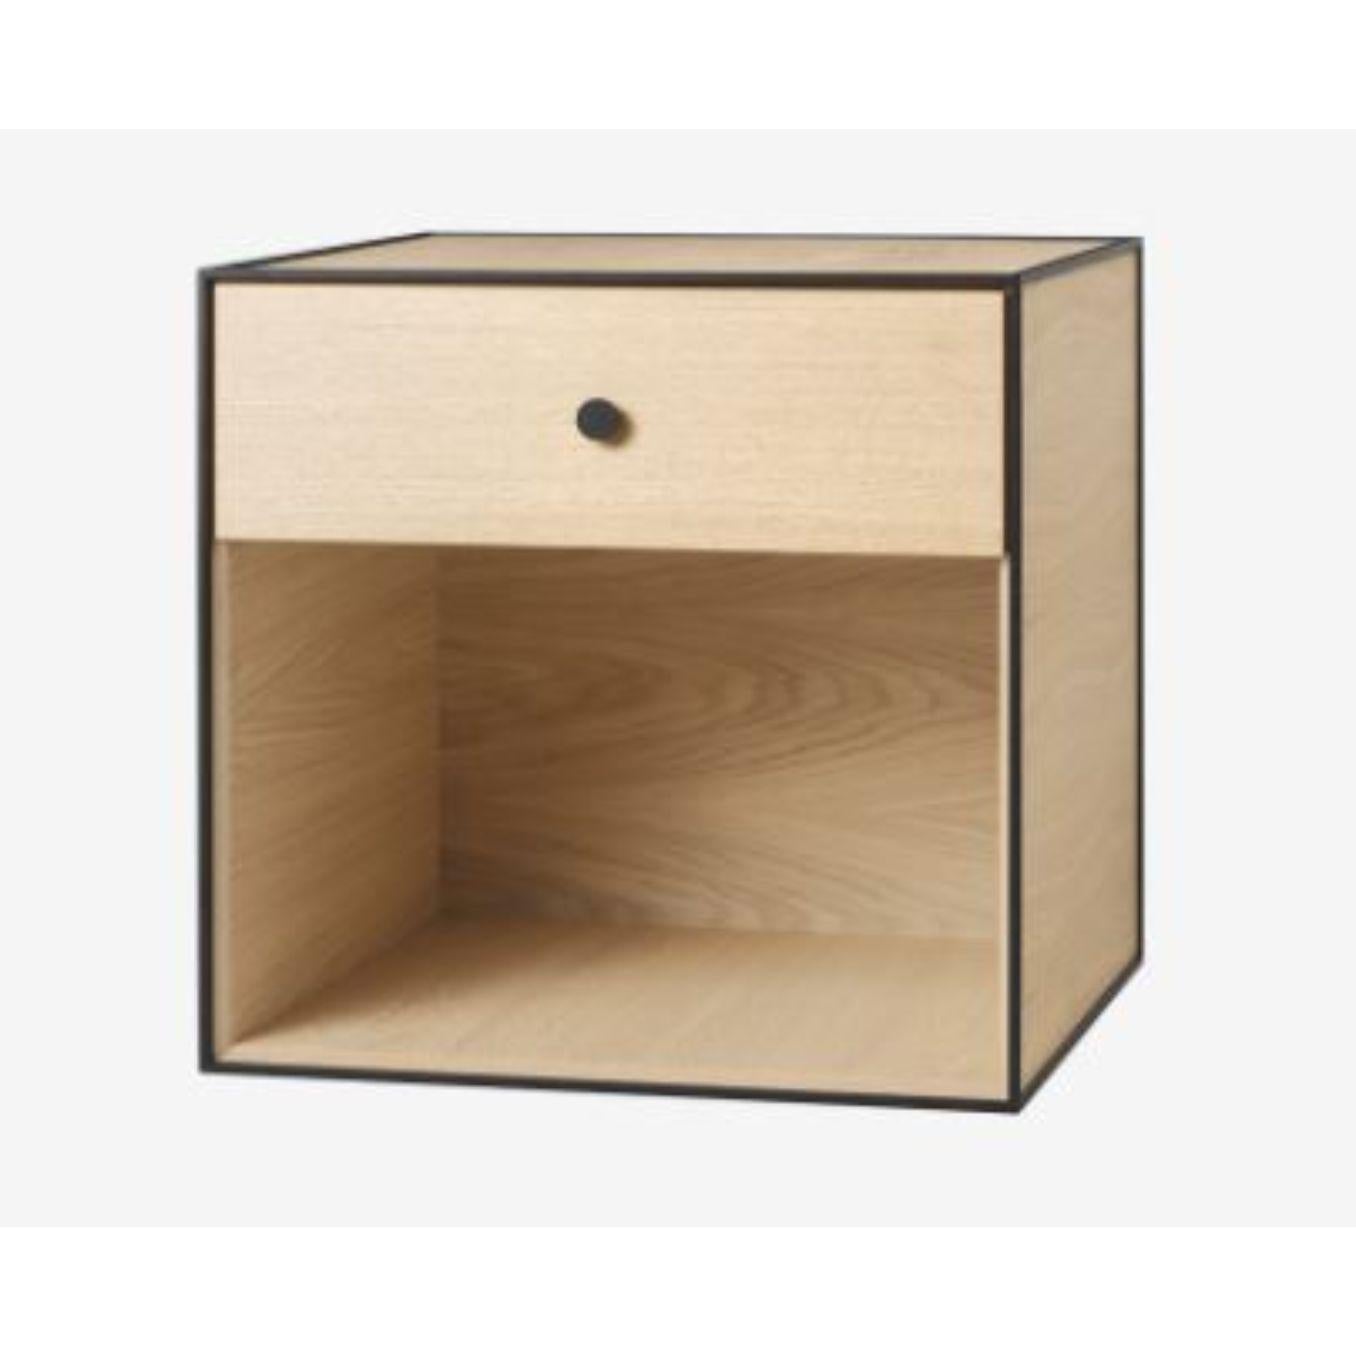 49 oak frame box with 1 drawer by Lassen
Dimensions: D 49 x W 42 x H 49 cm 
Materials: Finér, Melamin, Melamin, Melamine, Metal, Veneer, Oak
Also available in different colours and dimensions. 
Weight: 15 Kg


By Lassen is a Danish design